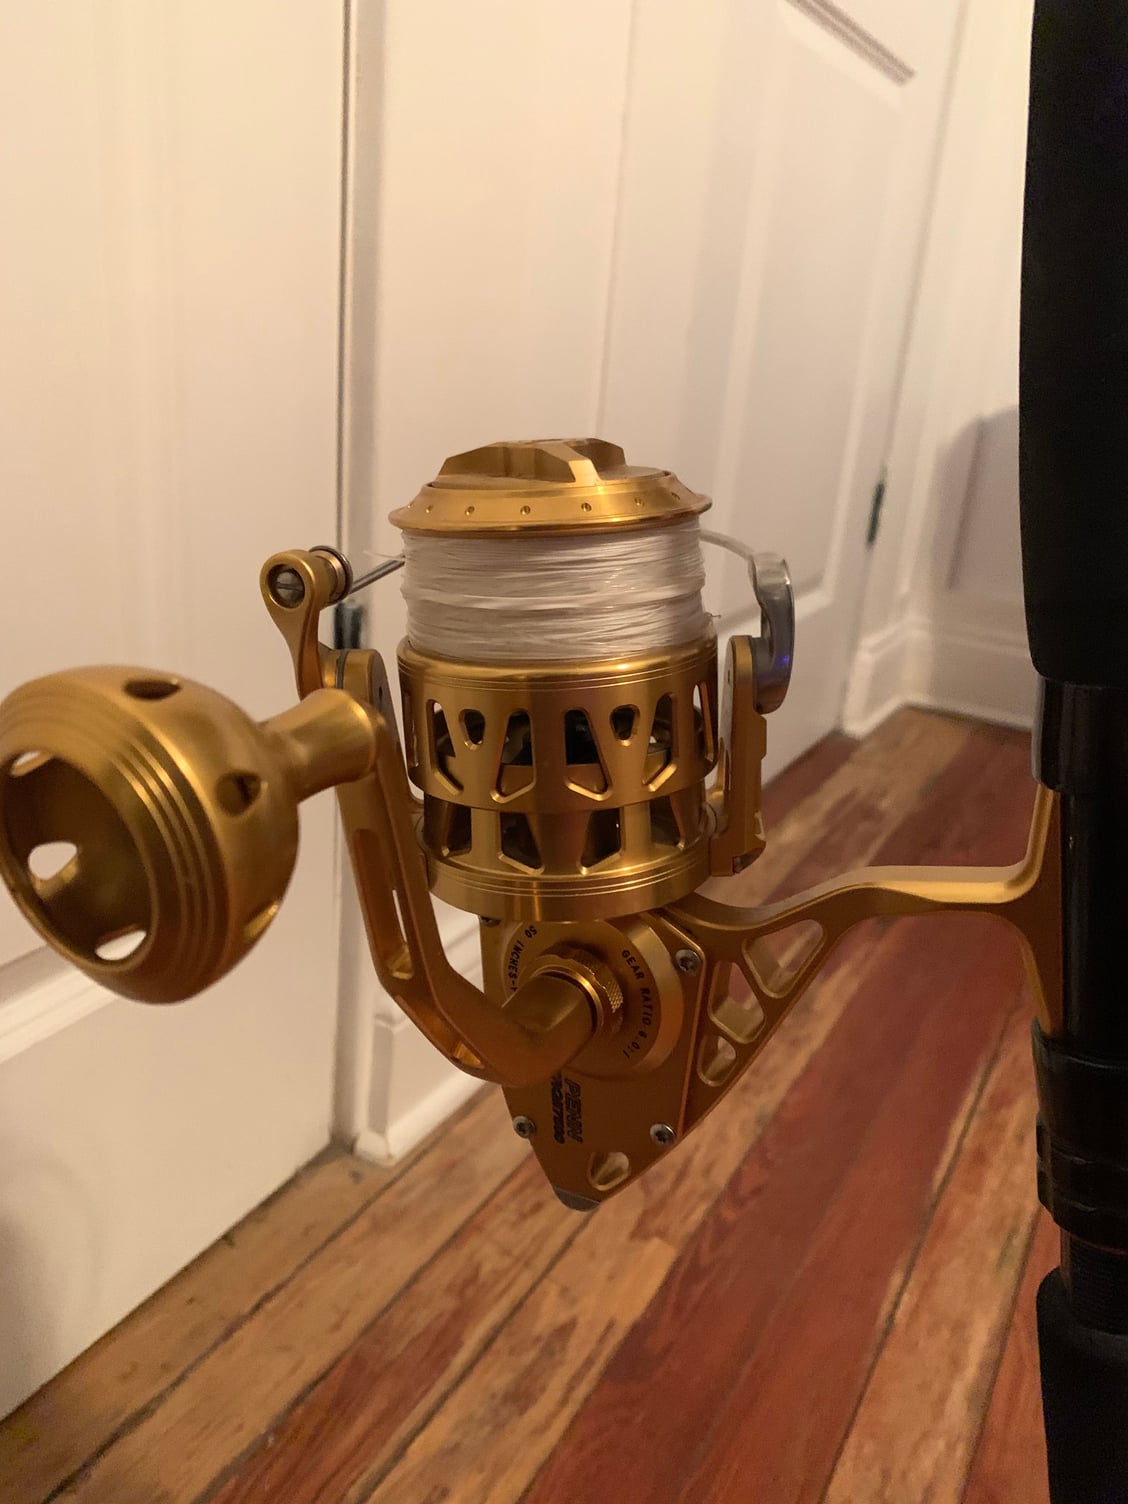 Penn torque 2 7500 spinners gold (2 available) - The Hull Truth